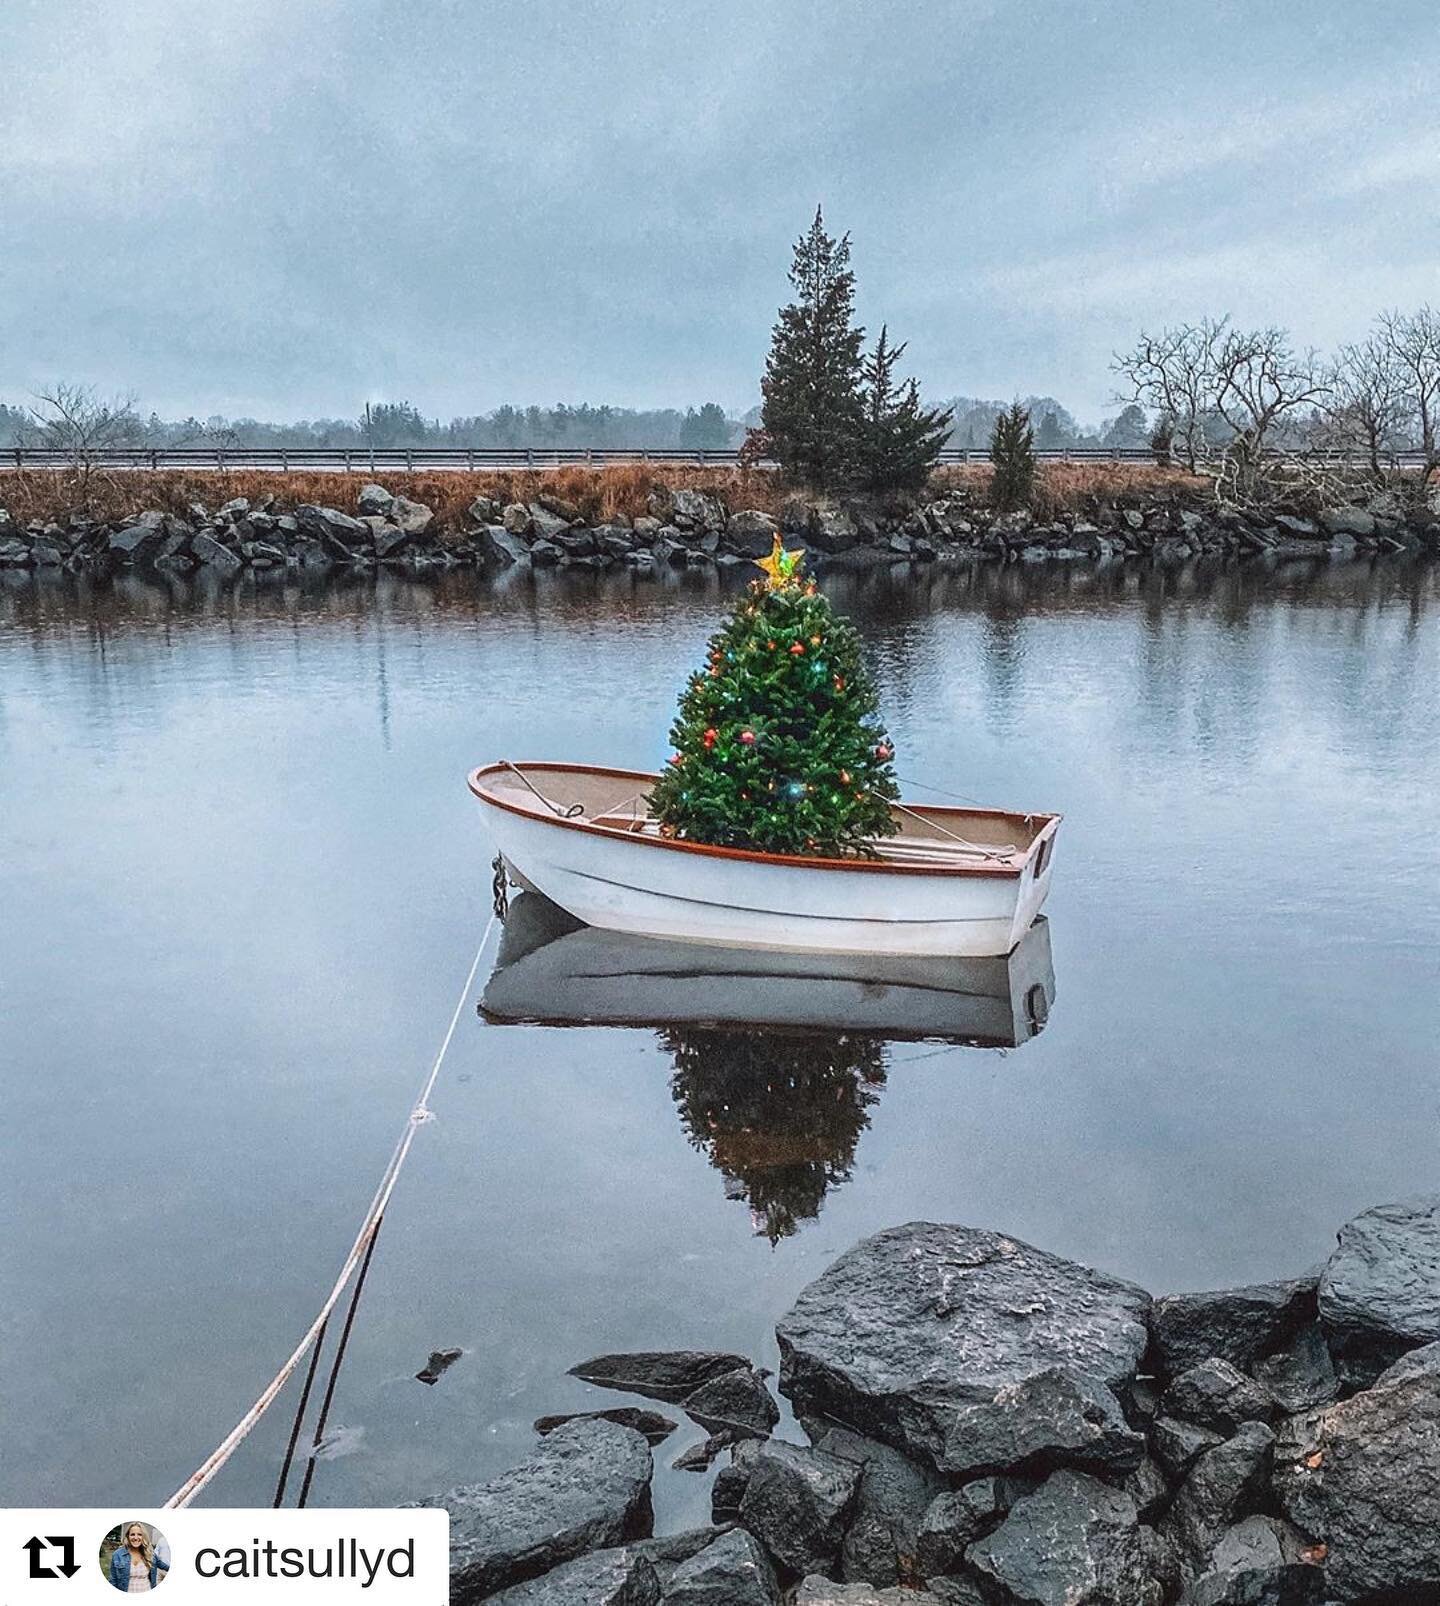 #Repost @caitsullyd with @get_repost
・・・
The sweetest little Christmas Tree you ever did see. 🌲 ⚓️ #Farmcoastchristmas #farmcoast #tivertonri